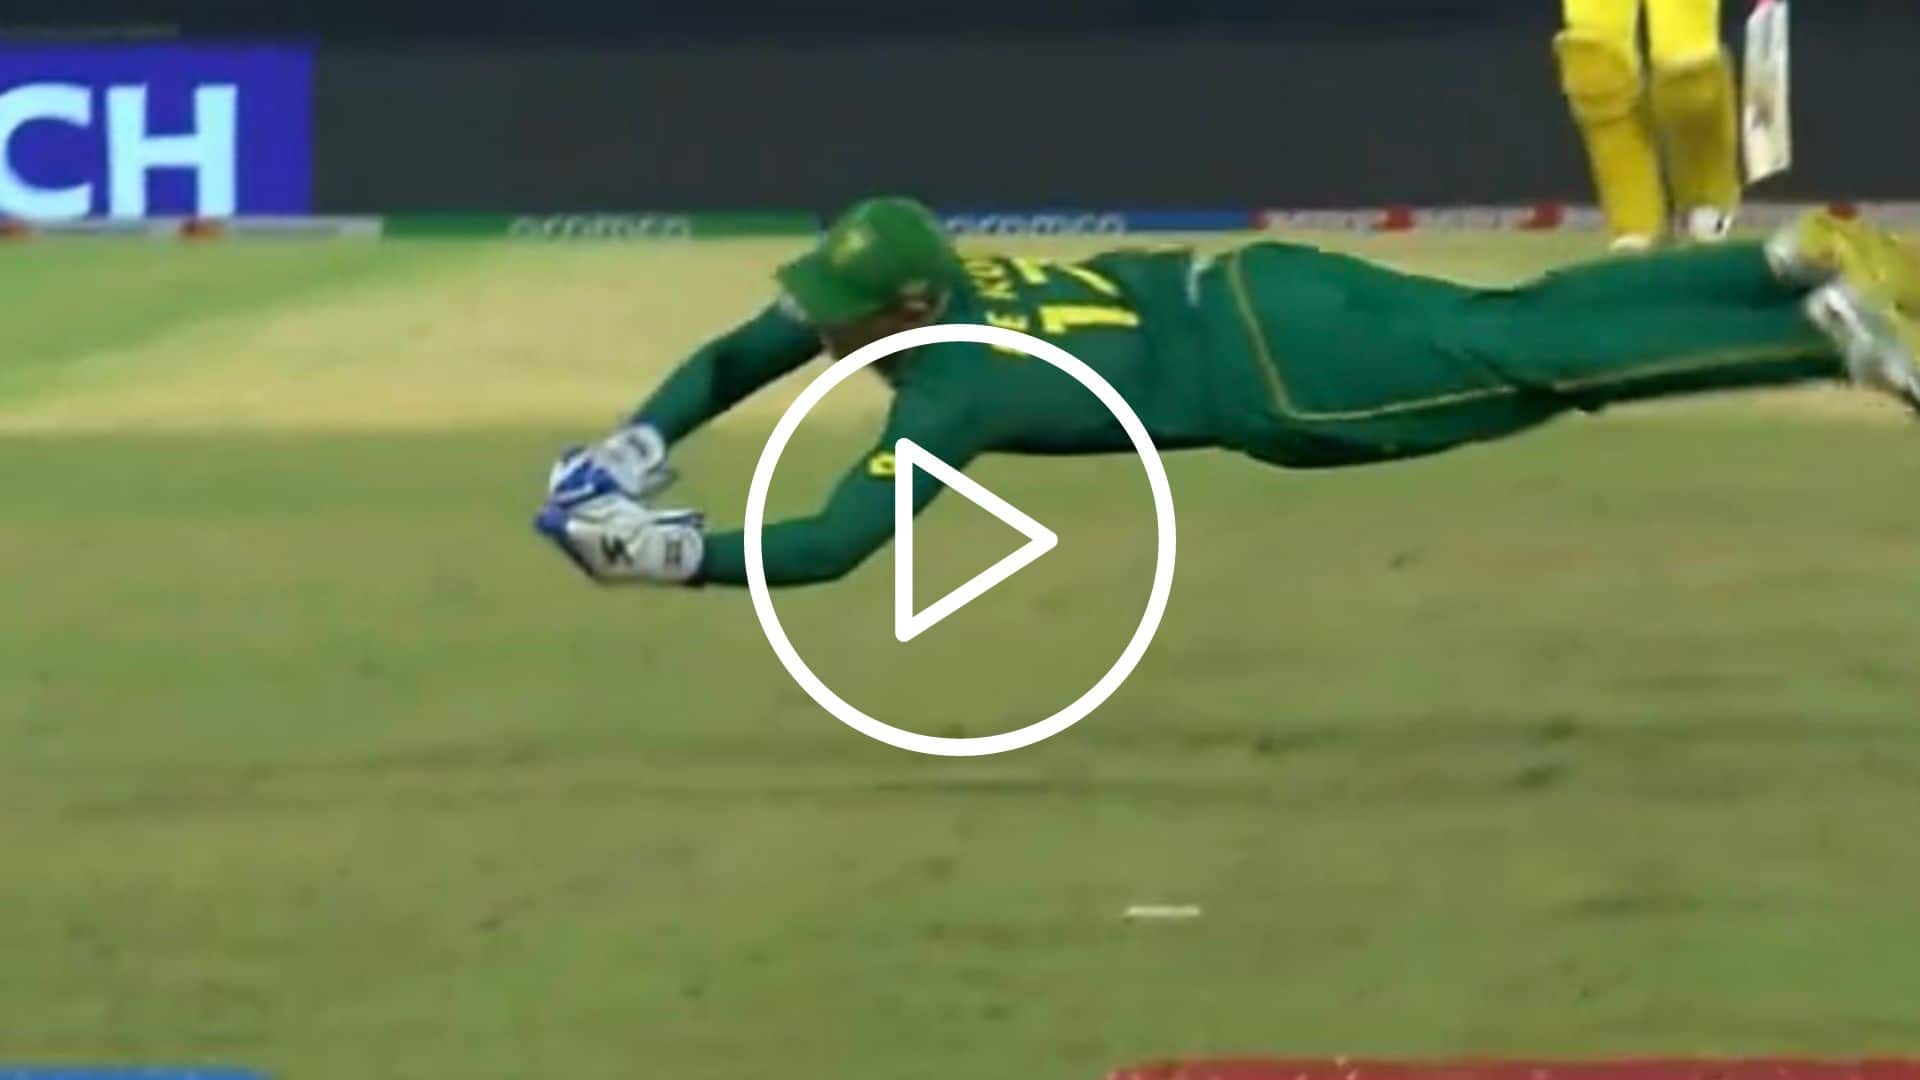 [Watch] Quinton de Kock Pouches Stunner To Dismiss Stoinis In SA vs AUS World Cup Match